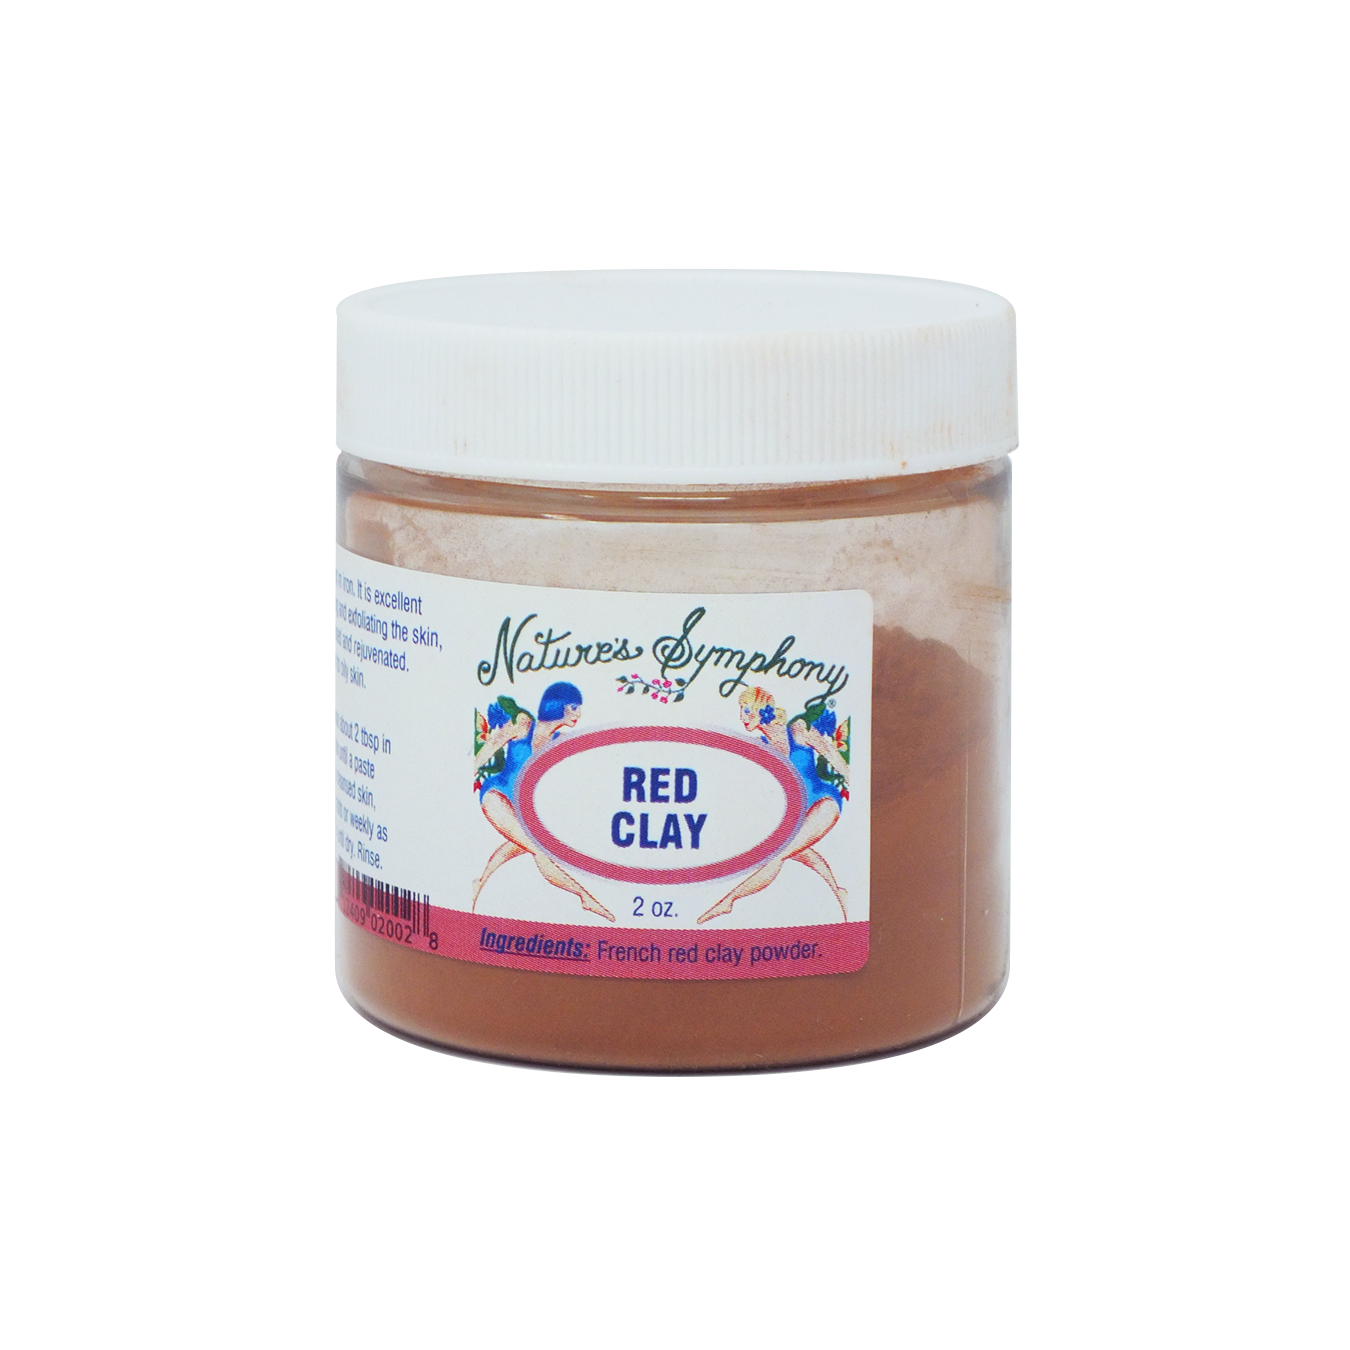 Red Clay, Mask - 2oz (56g)